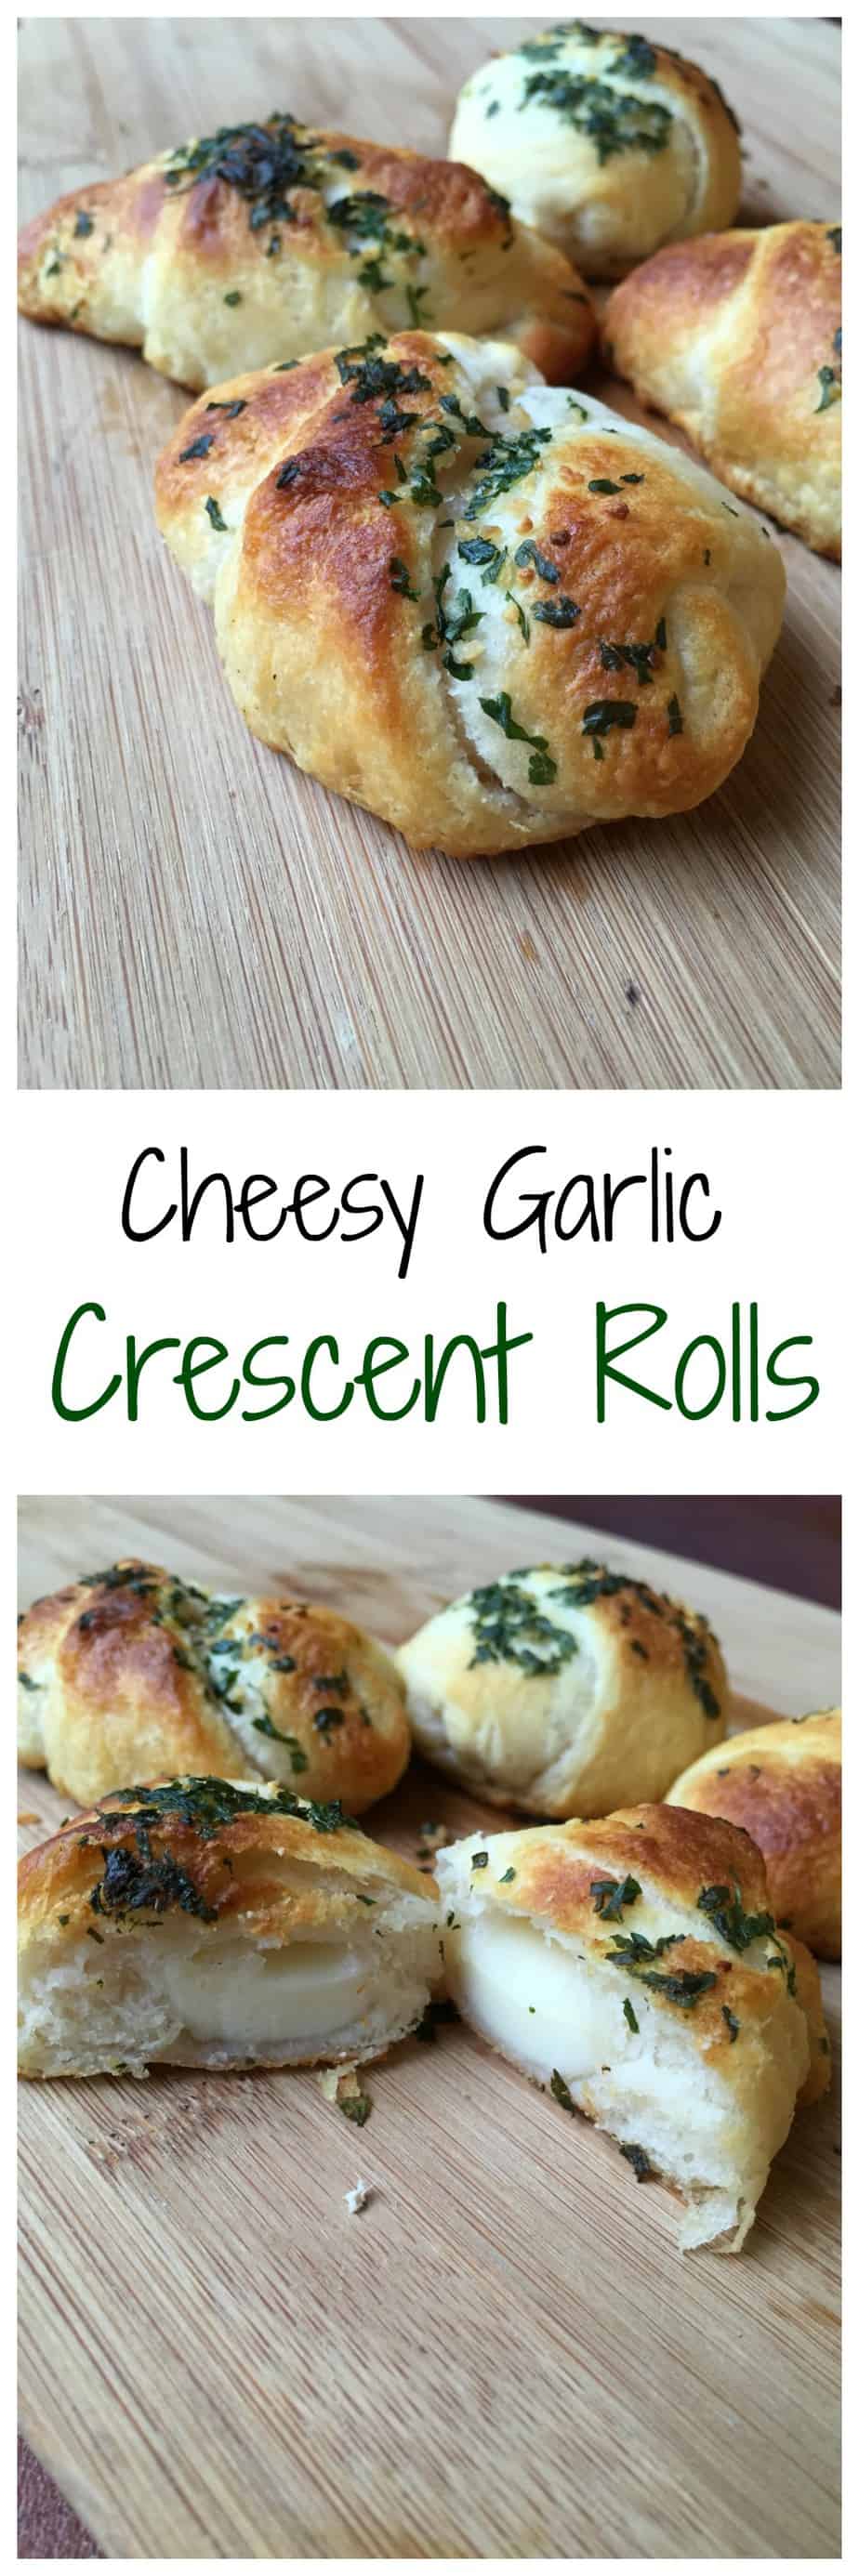 Cheesy garlic crescent rolls are the perfect addition to any family dinner. Easy and absolutely delicious with pizza, pasta or anything Italian!